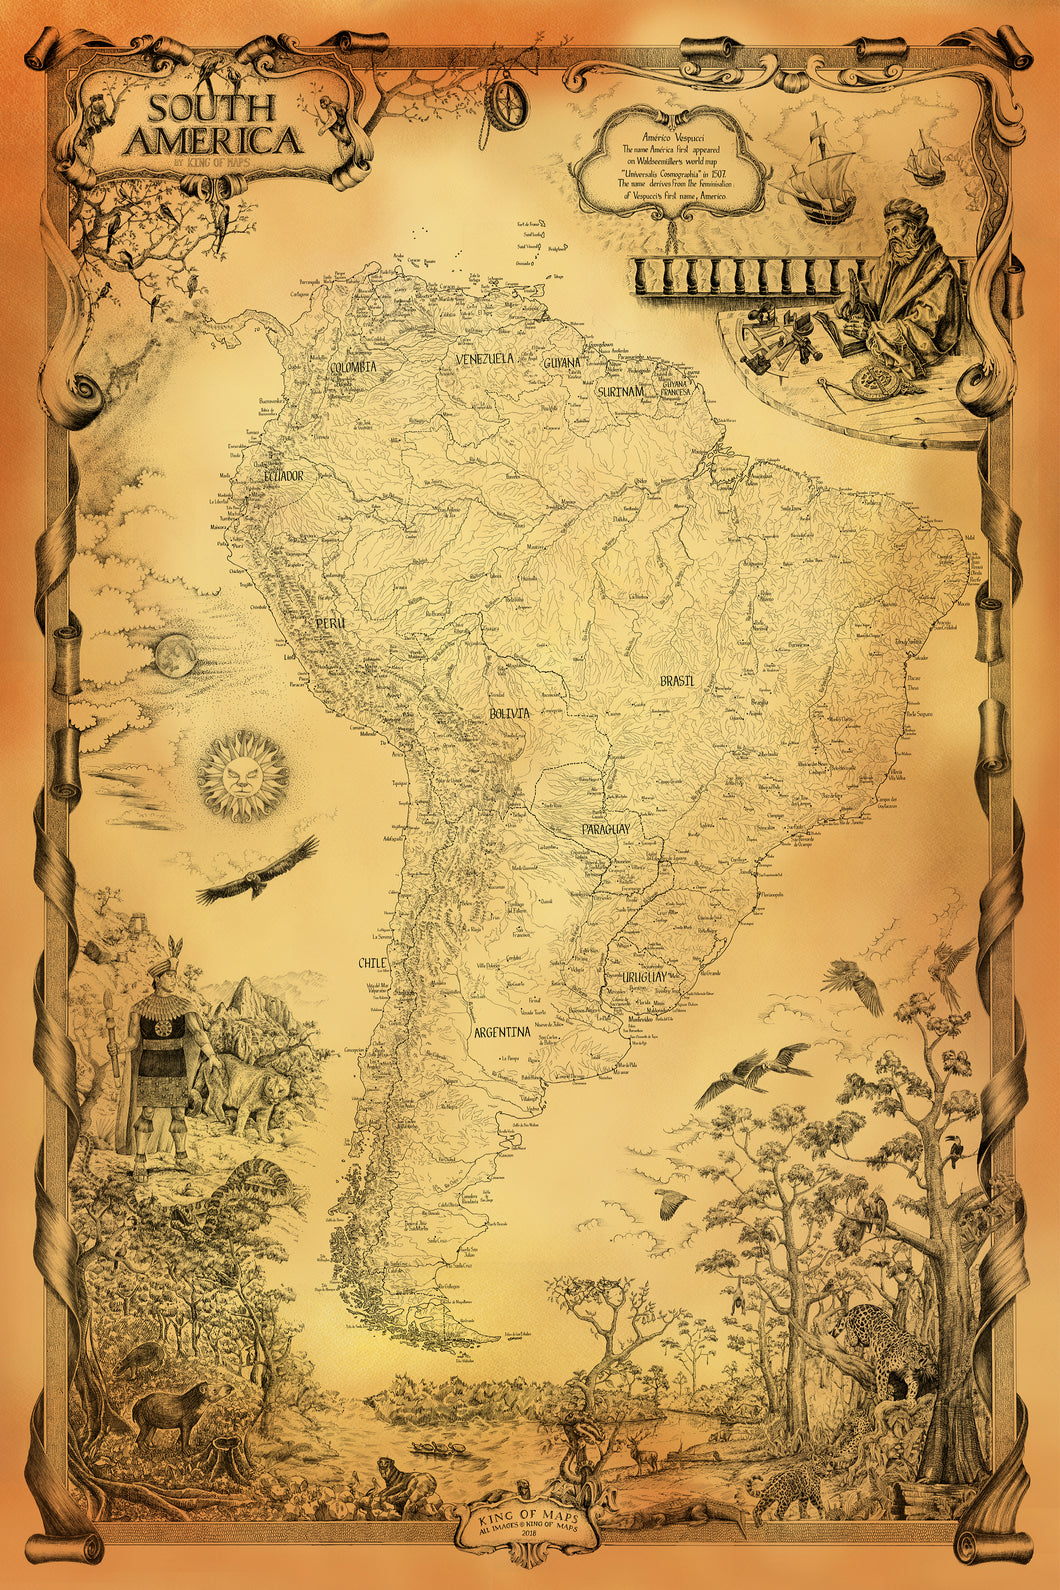 South America continental map with dedication to inka and Americo Vespucci along with Amazonian wildlife scene all hand-drawn Gold color